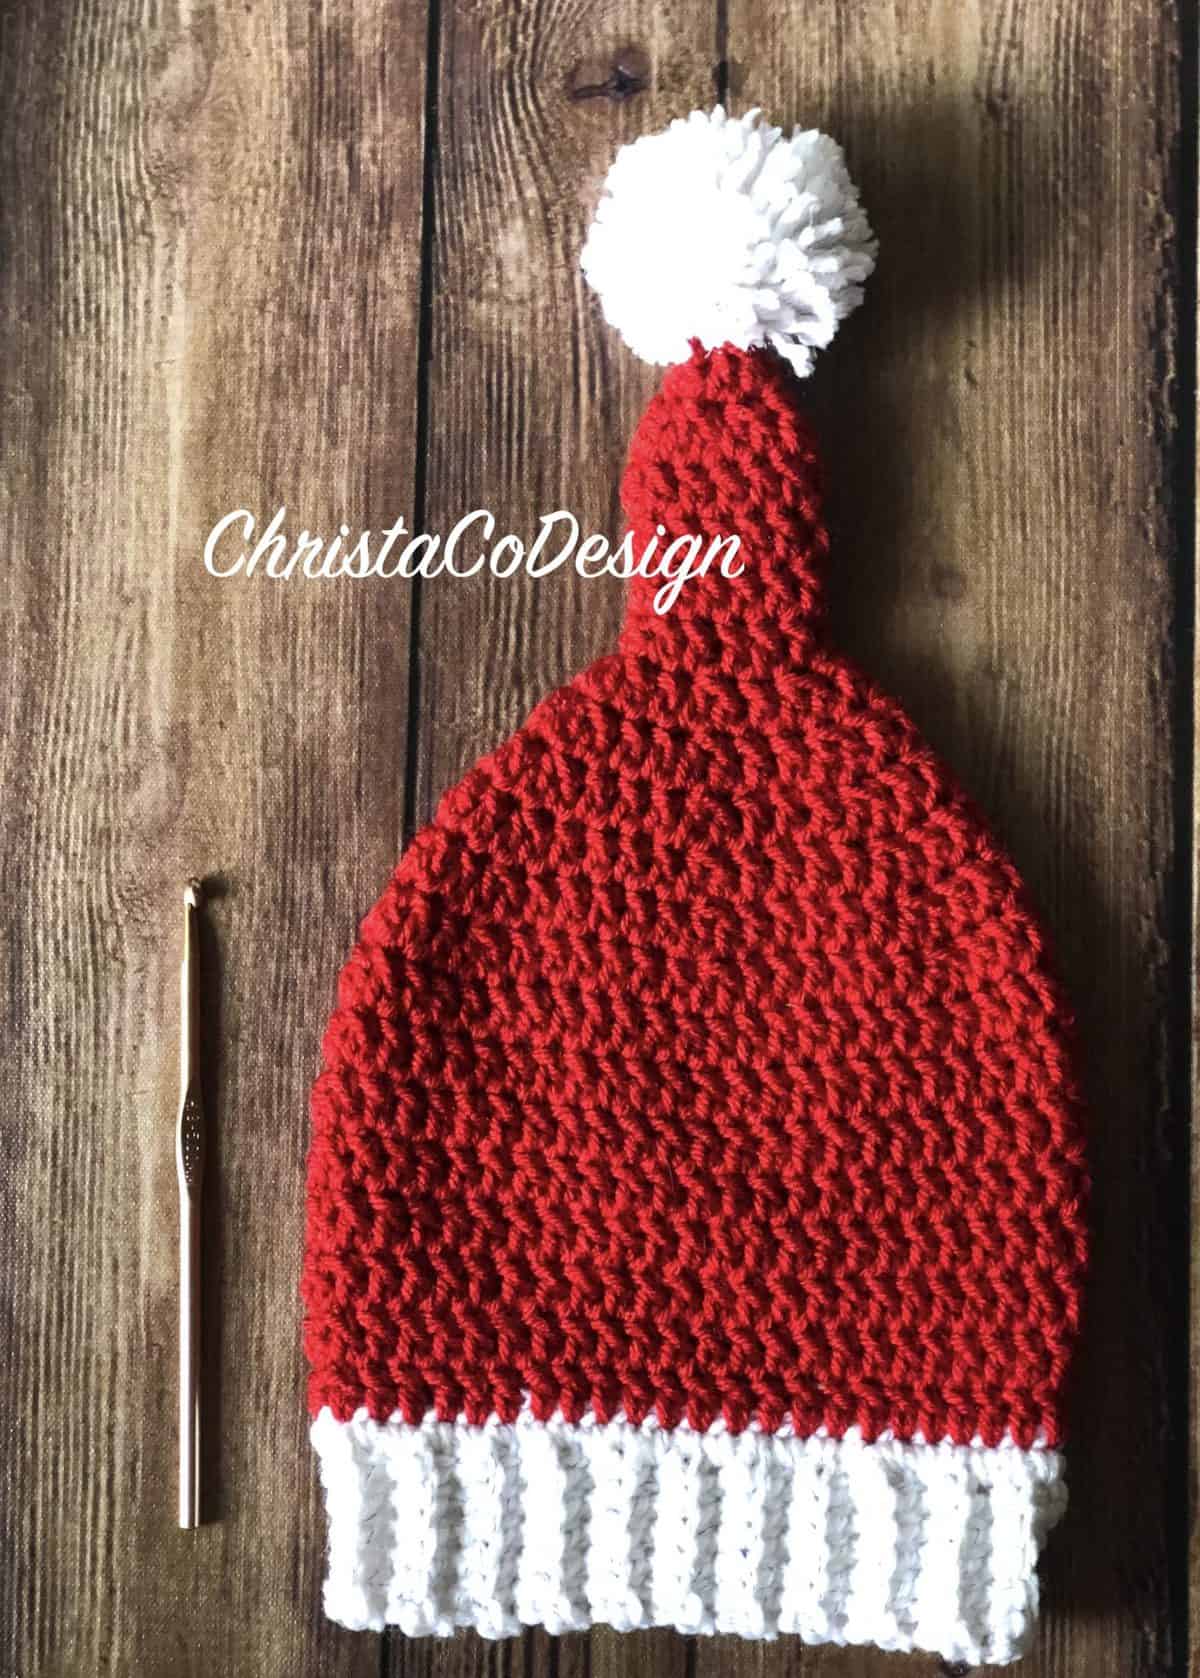 Crochet elf hat in red yarn and white trim with Pom Pom.